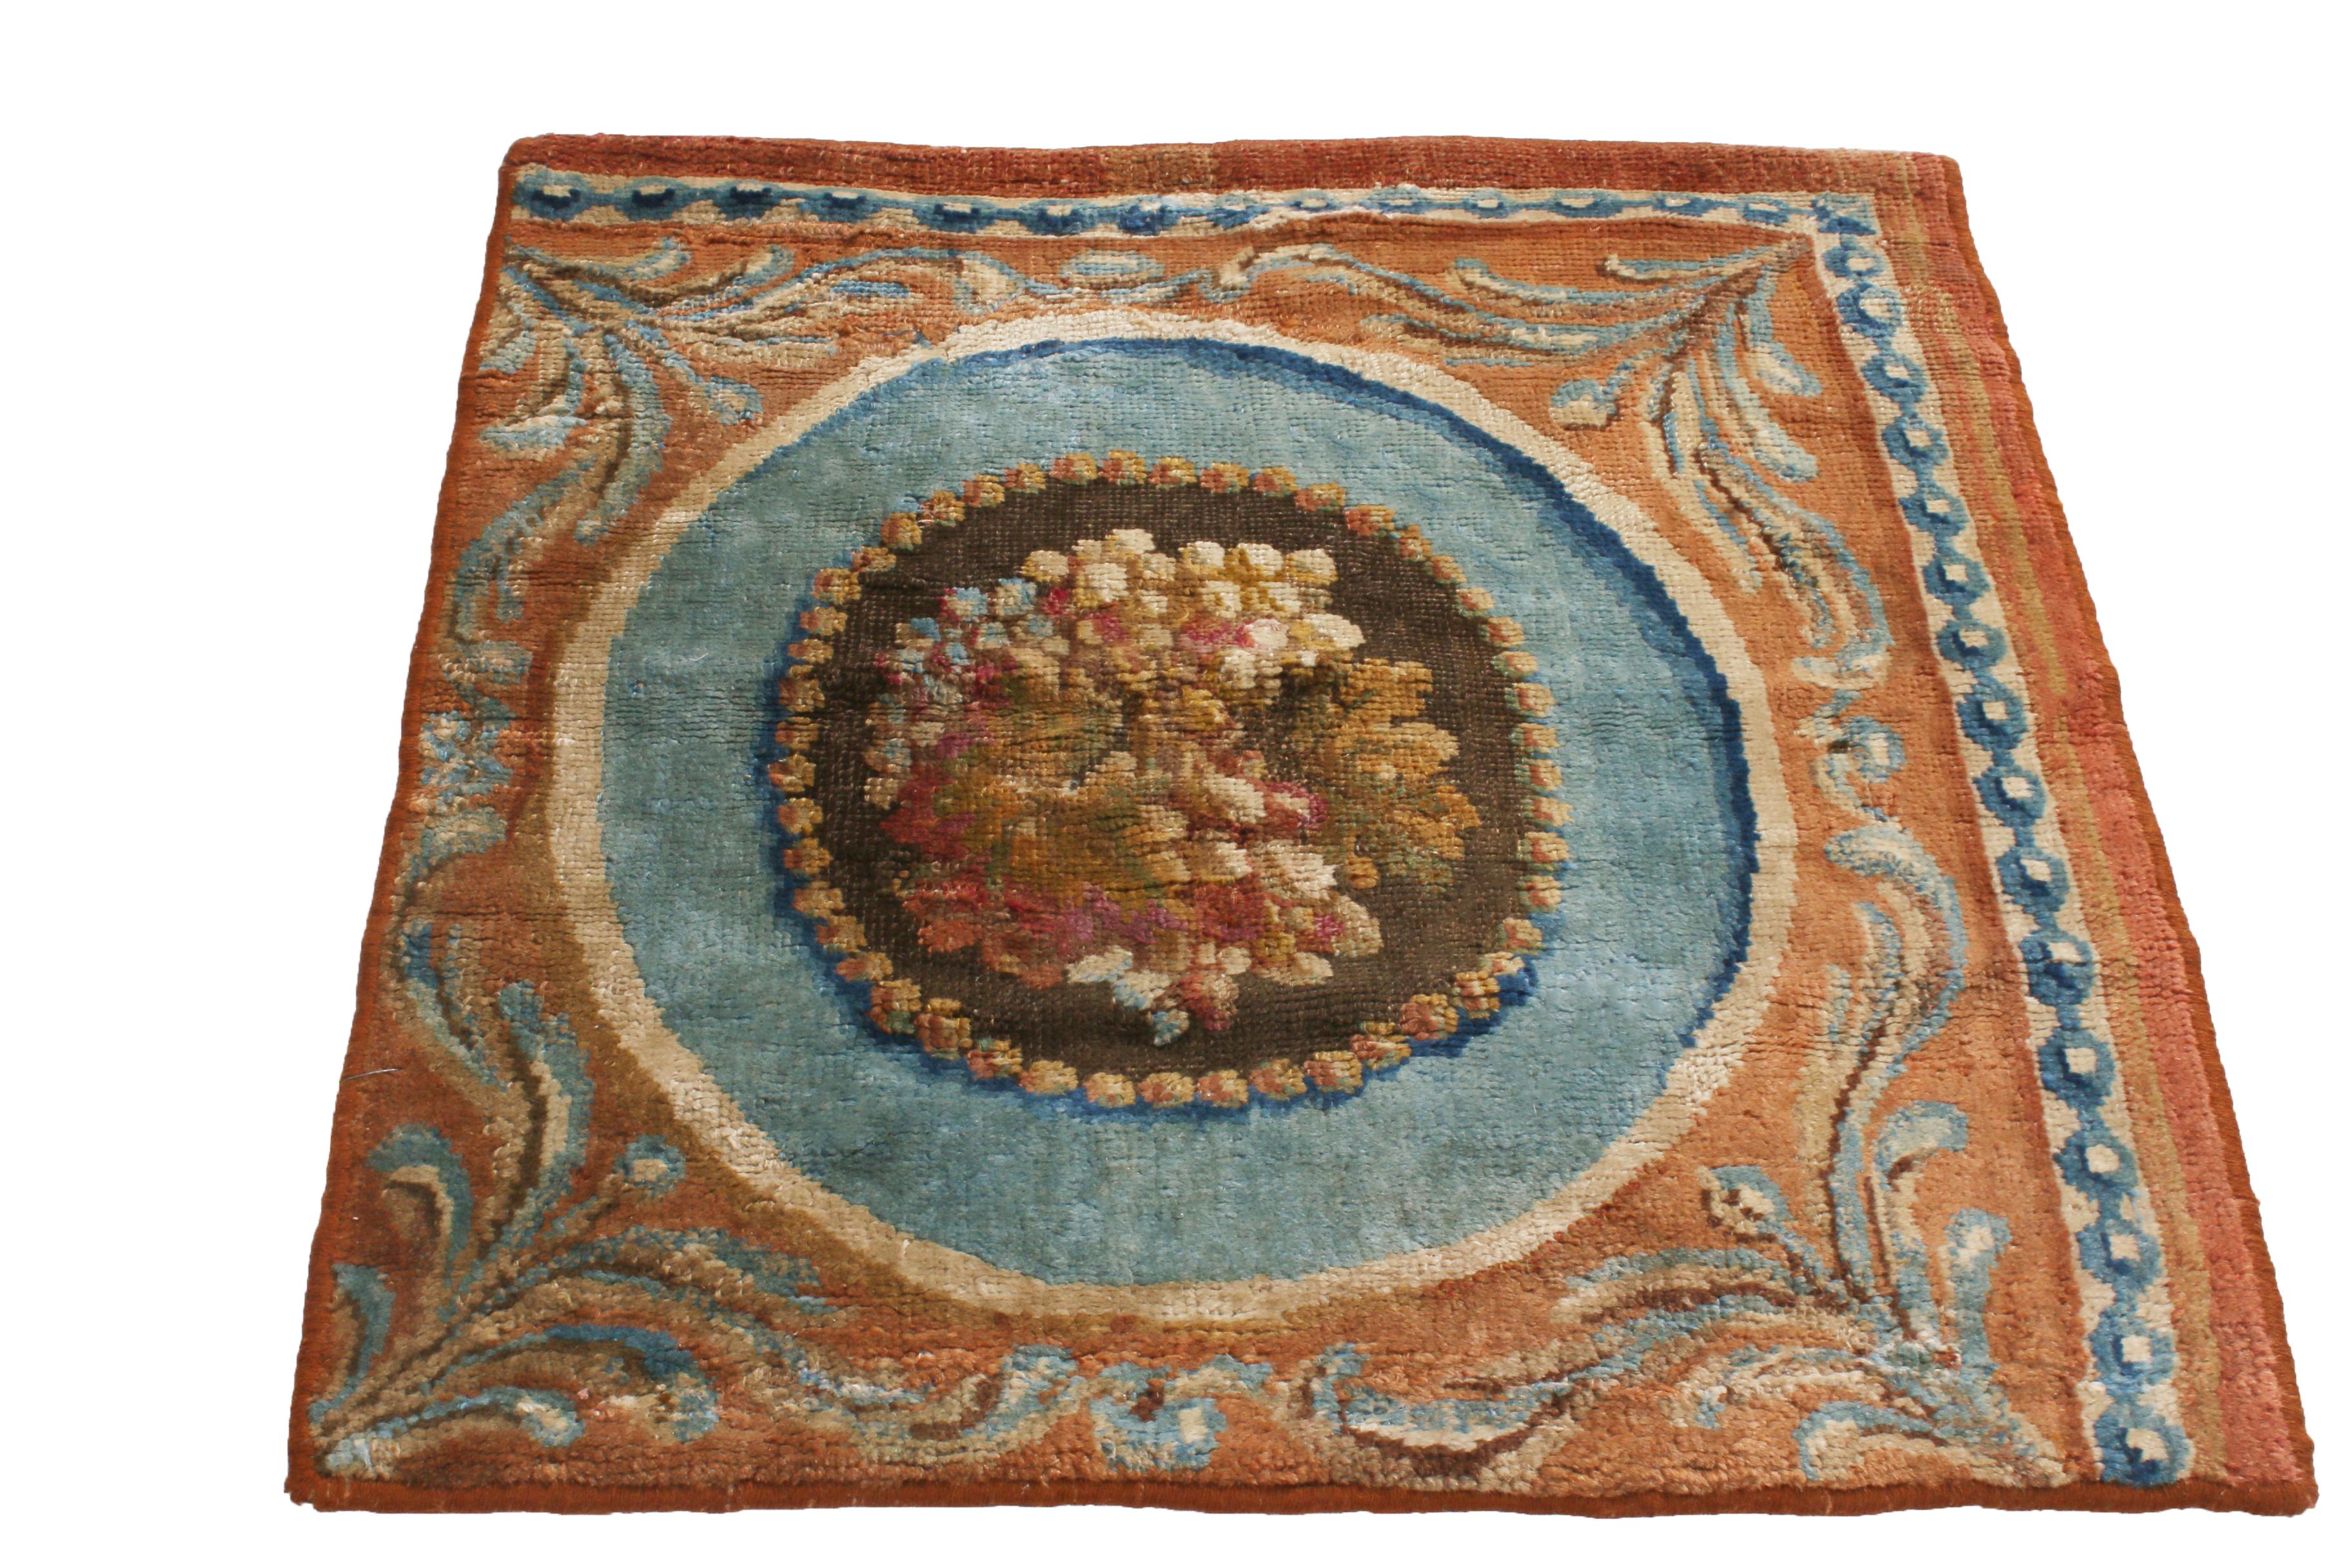 Originating from France in the 1800s, this antique Savonniere rug fragment was hand knotted with wool pile hailing from one of the most widely regarded European rug manufacturers for multiple centuries, often paralleling the most treasured Aubusson